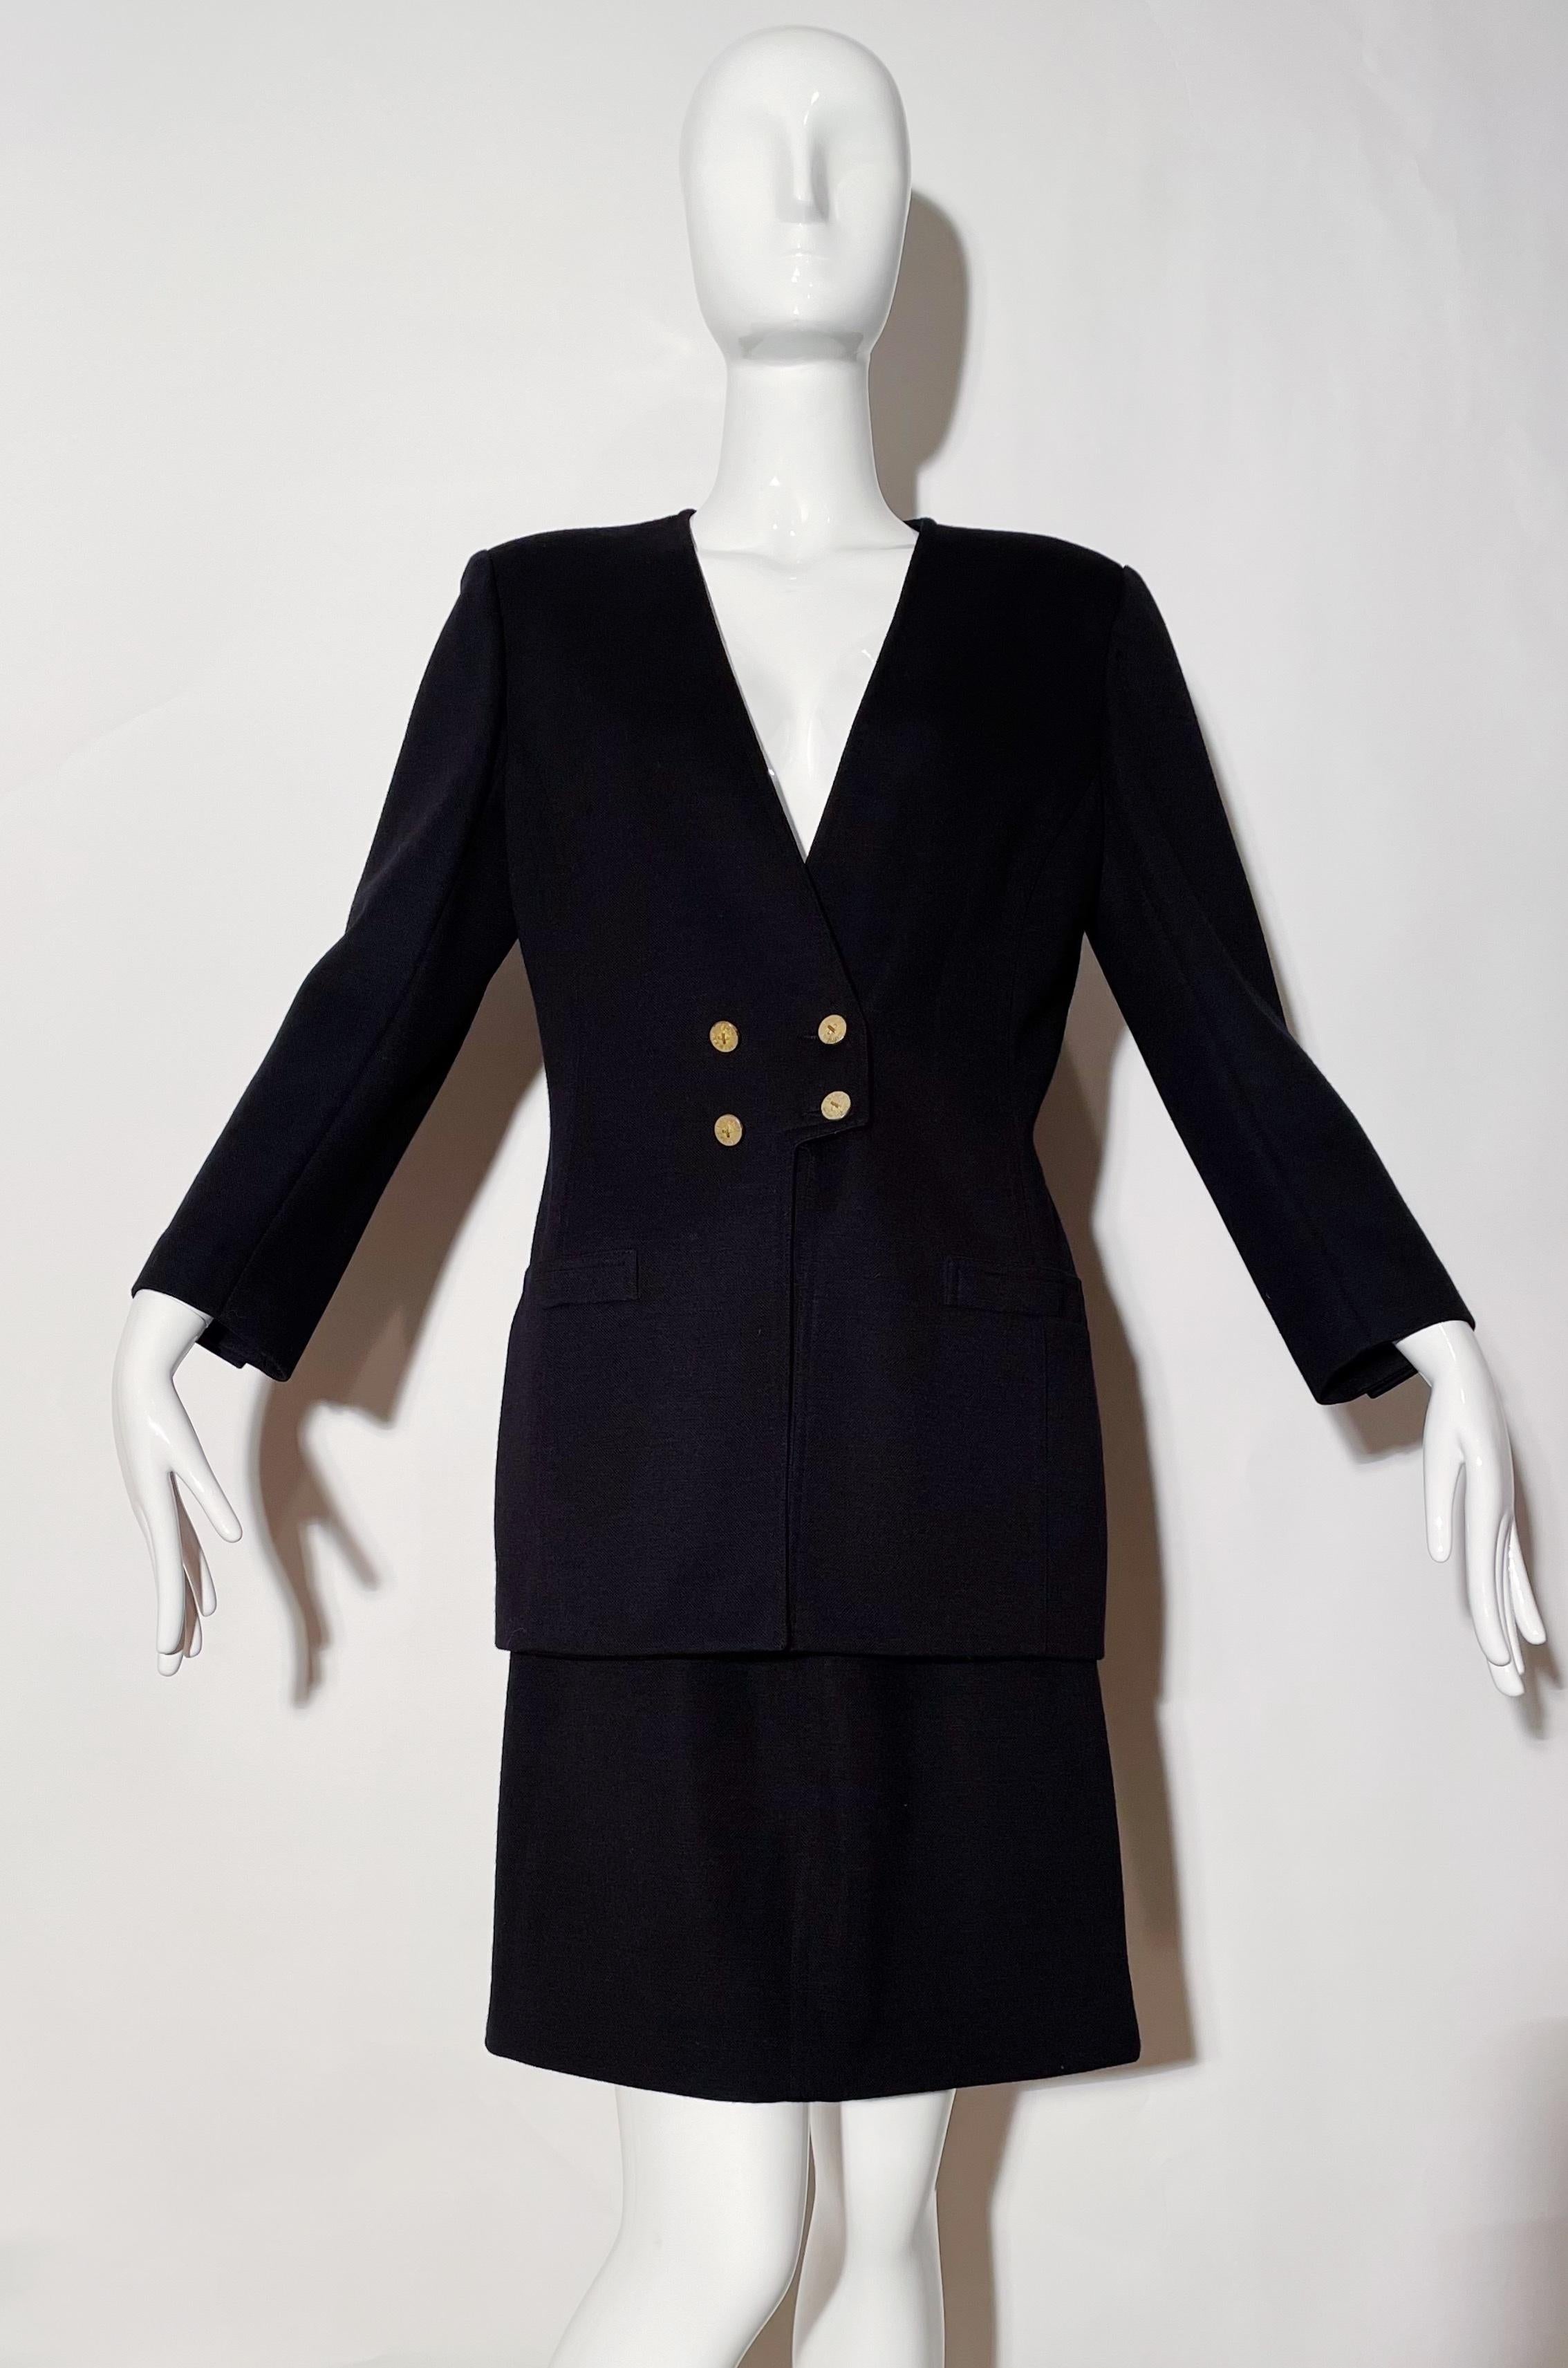 Black skirt suit. Shoulder pads. Front button closure. Front pockets. Rear zipper closure on skirt. Lined. Wool. 
*Condition: Excellent vintage condition. No visible flaws.

Measurements Taken Laying Flat (inches)—
Shoulder to Shoulder: 17